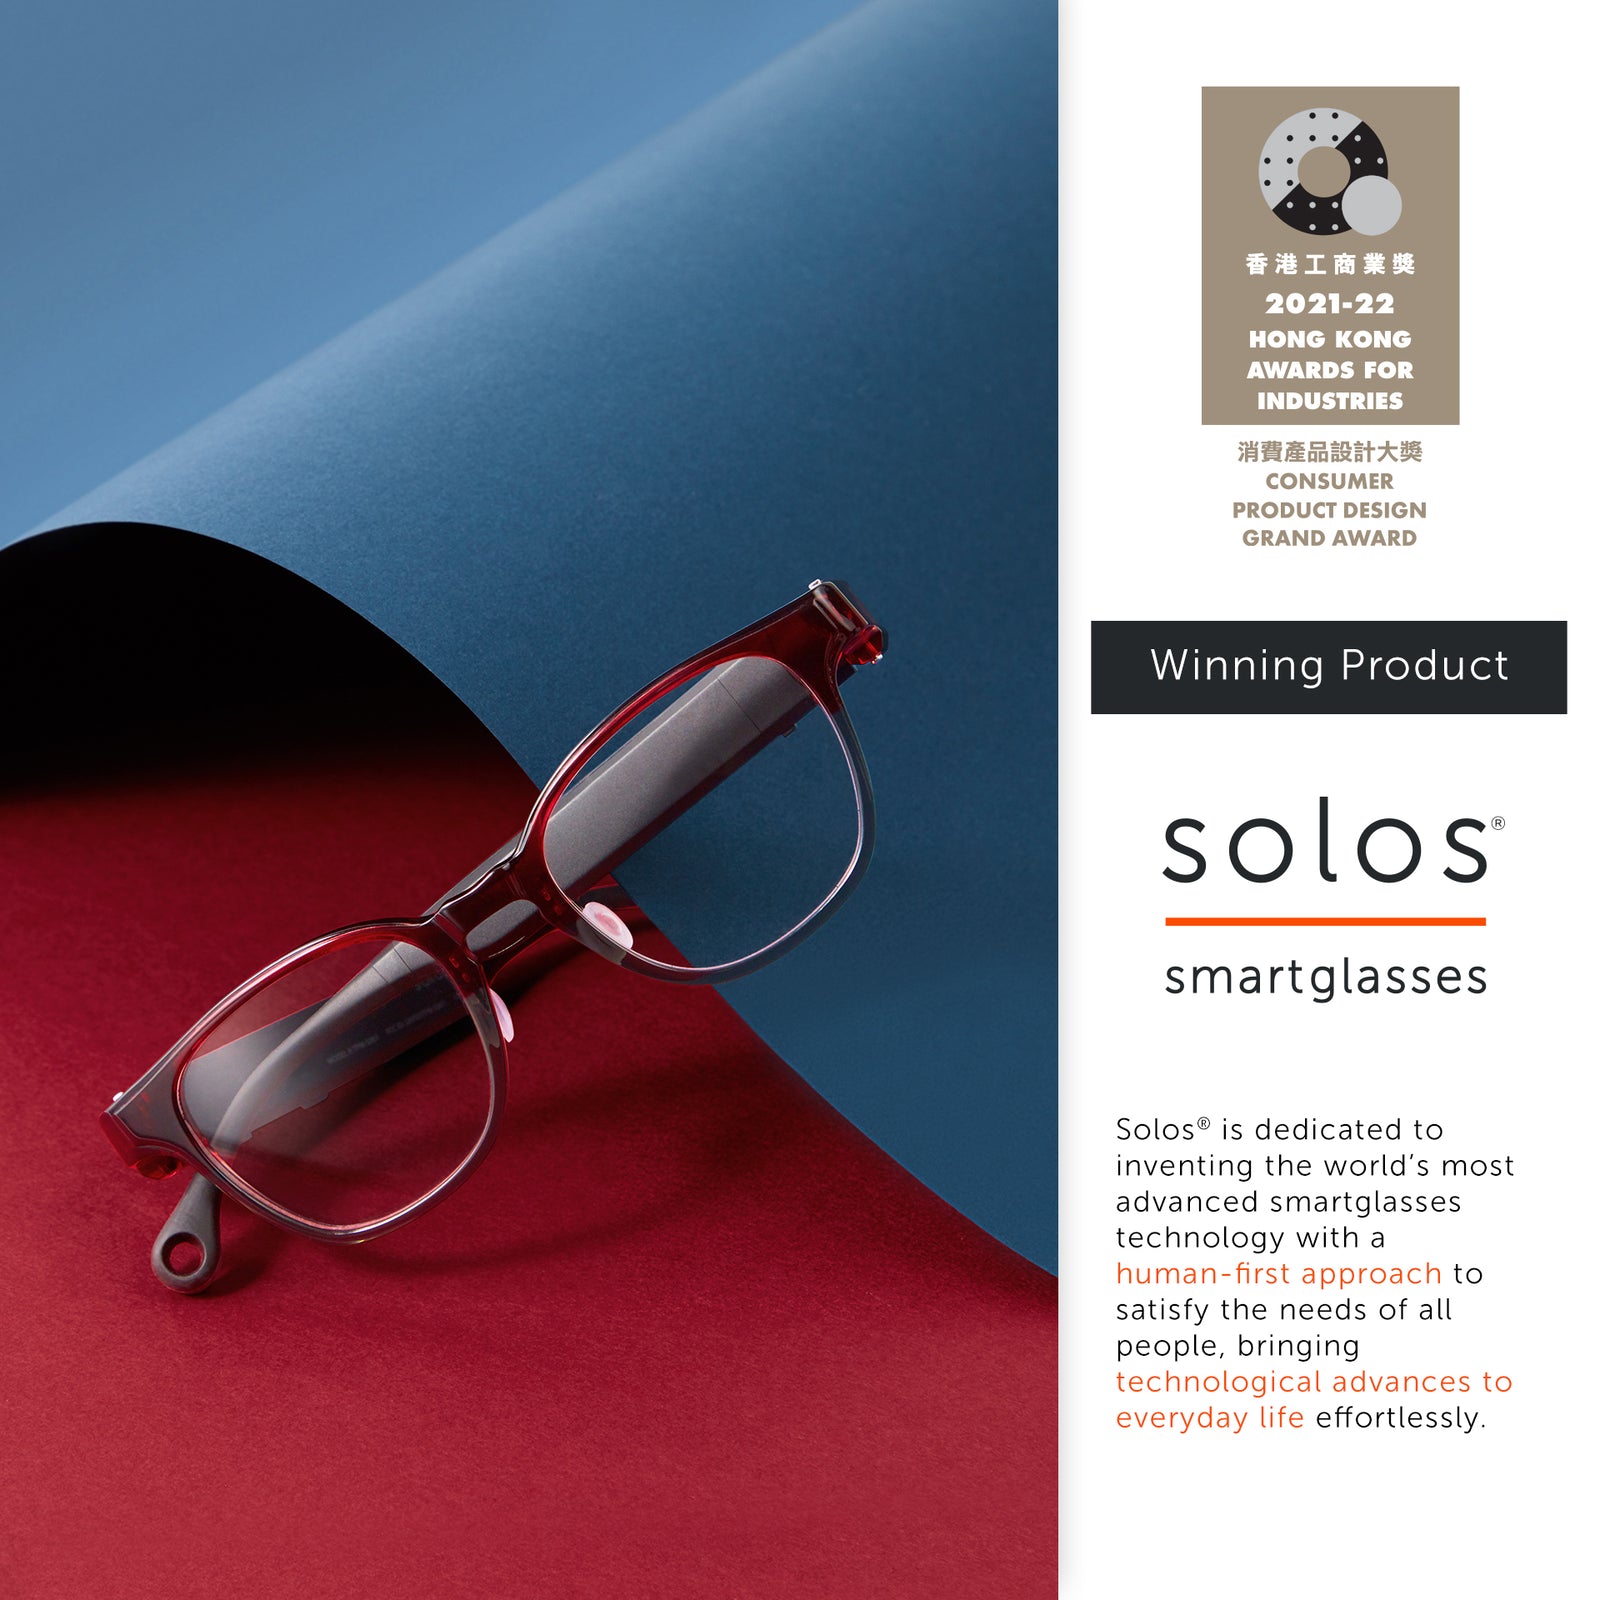 solos® smartglasses Secures Grand Award from Hong Kong Awards of Industries - Solos Technology Limited